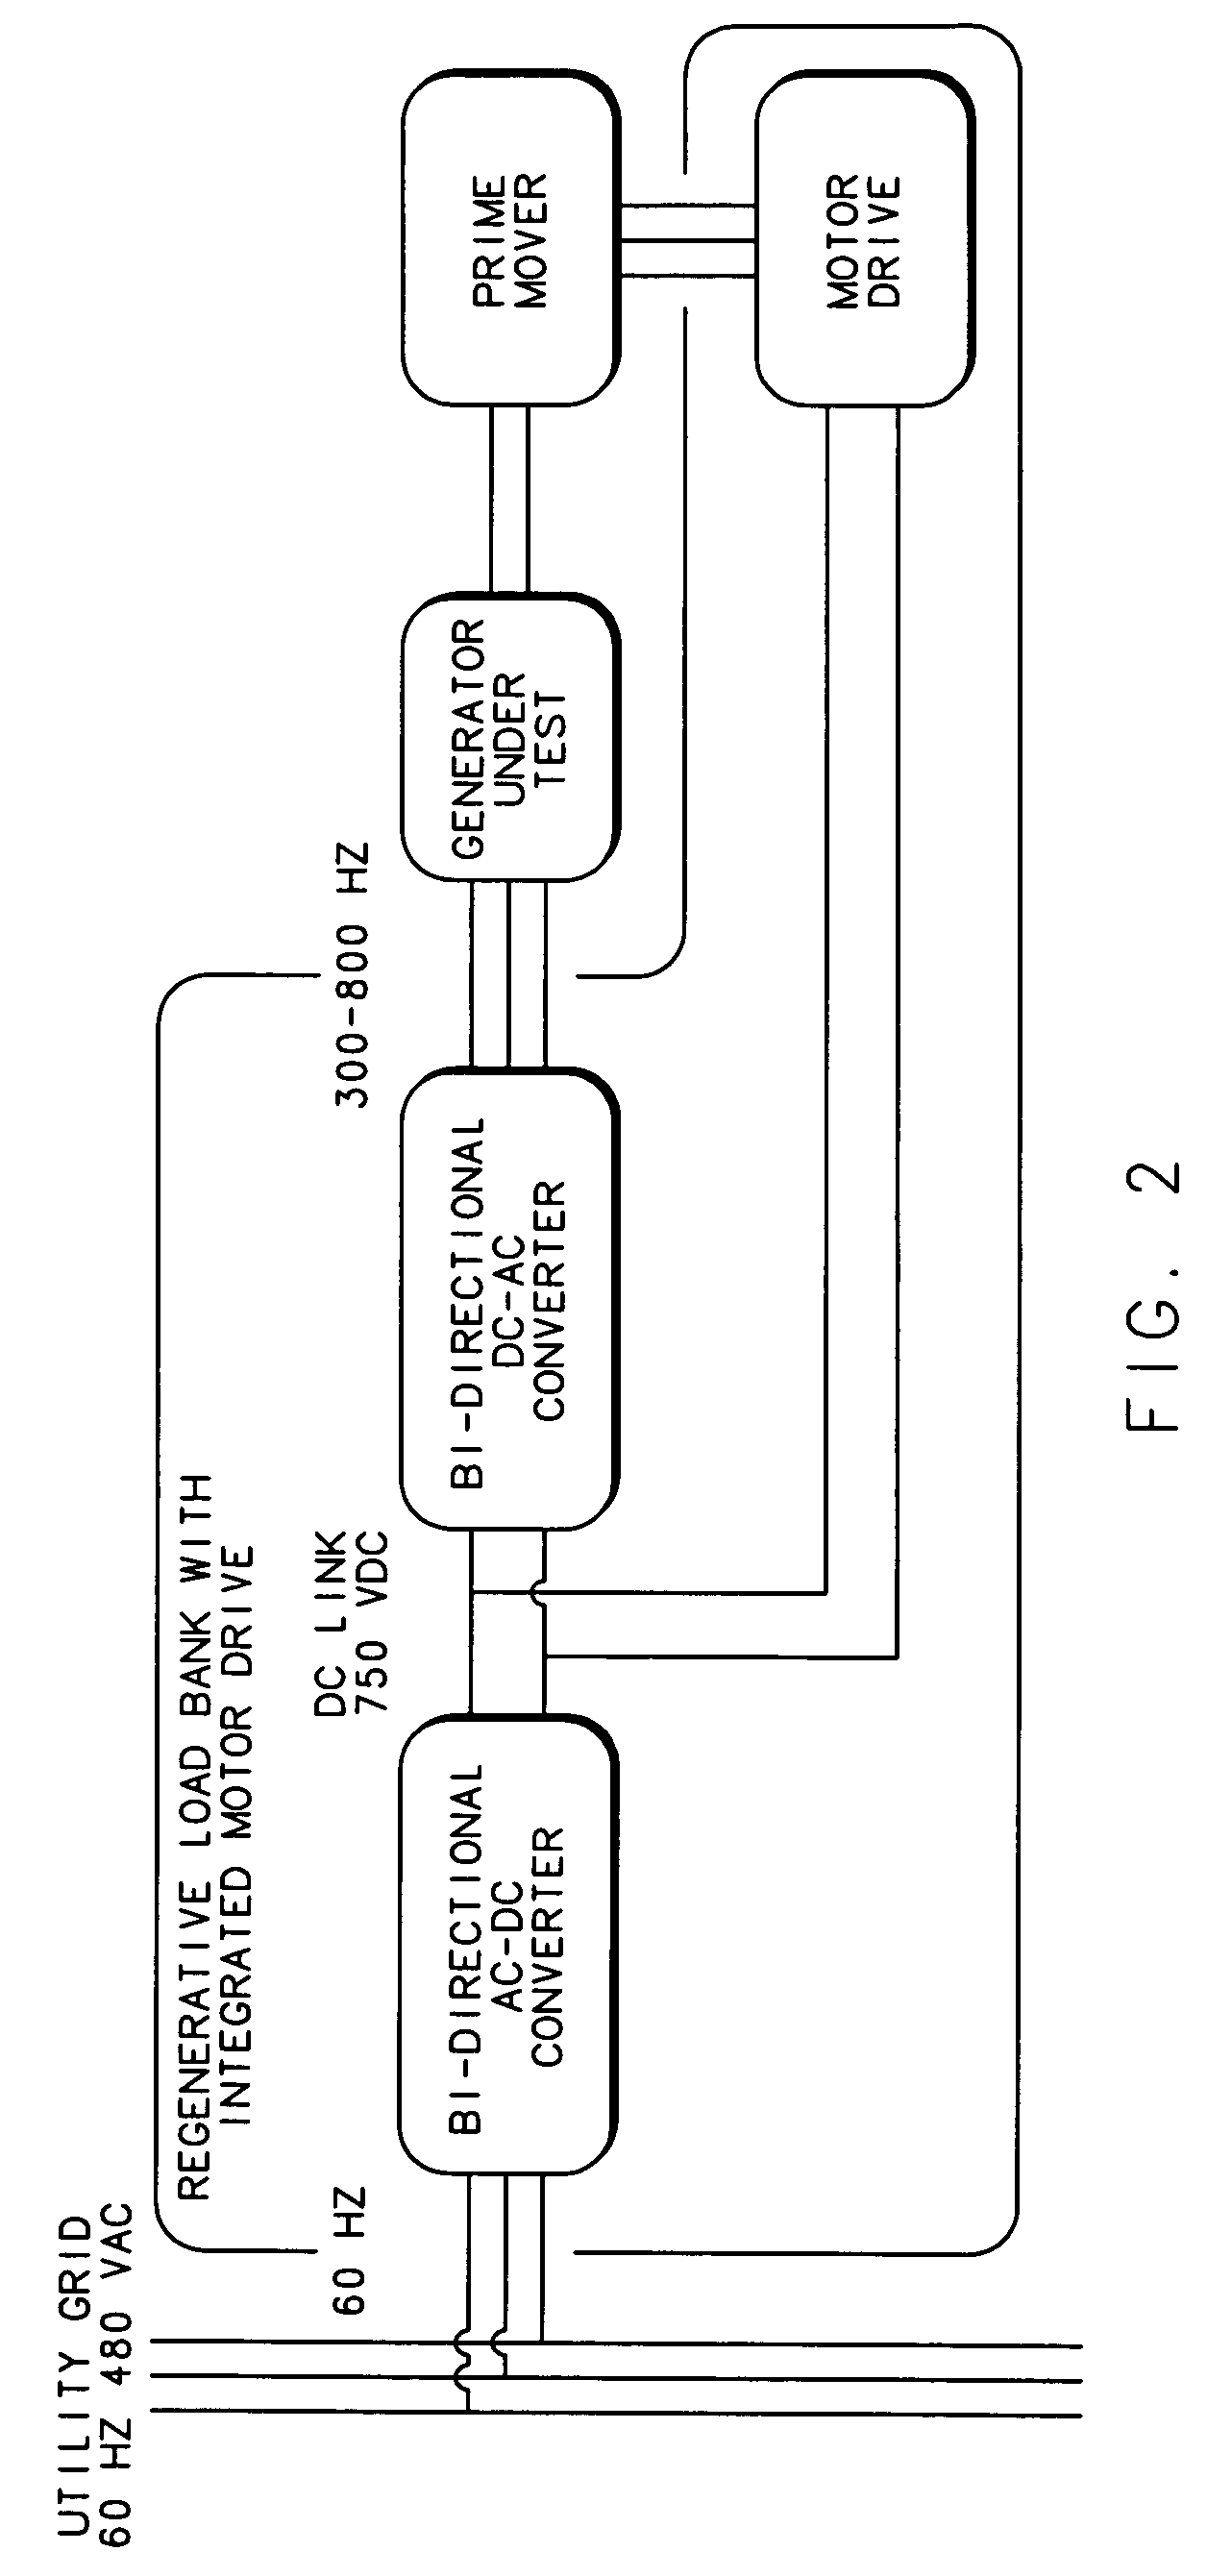 Regenerative load bank with a motor drive